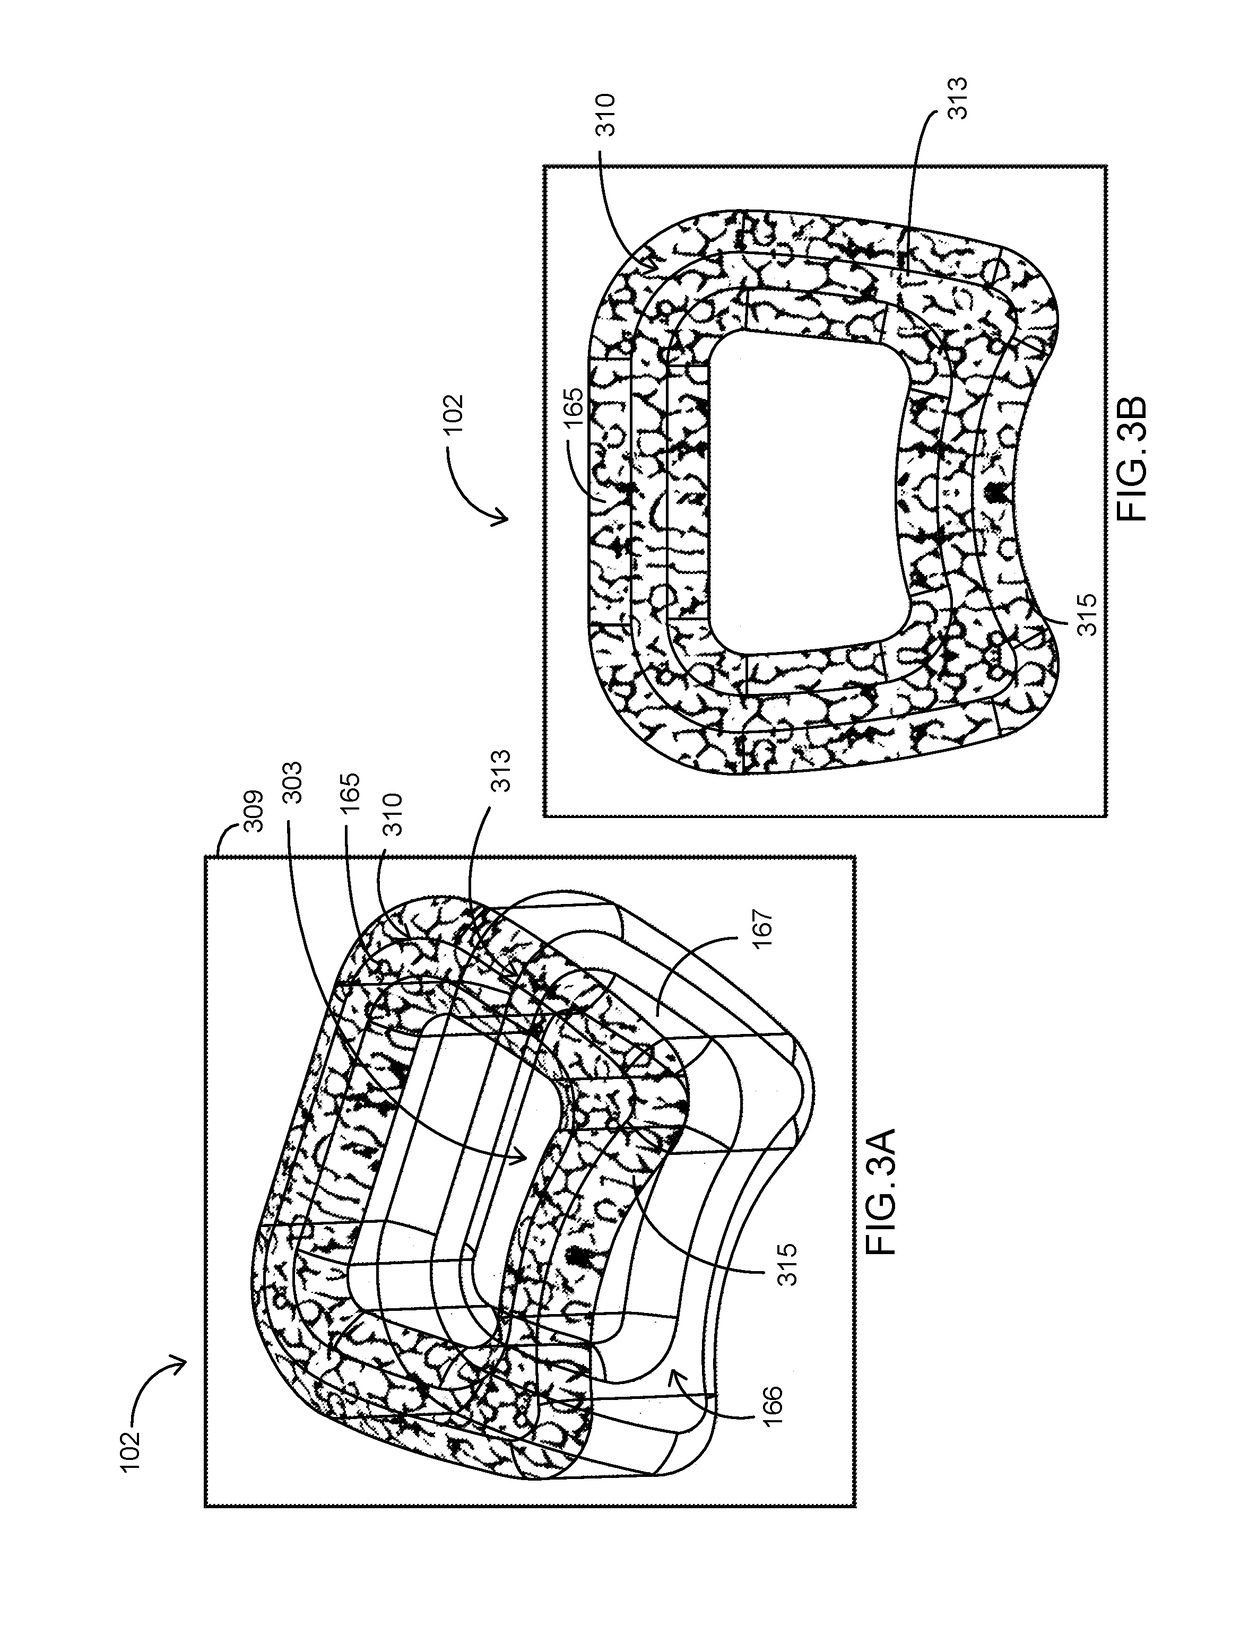 Systems and methods for the patterning of material substrates